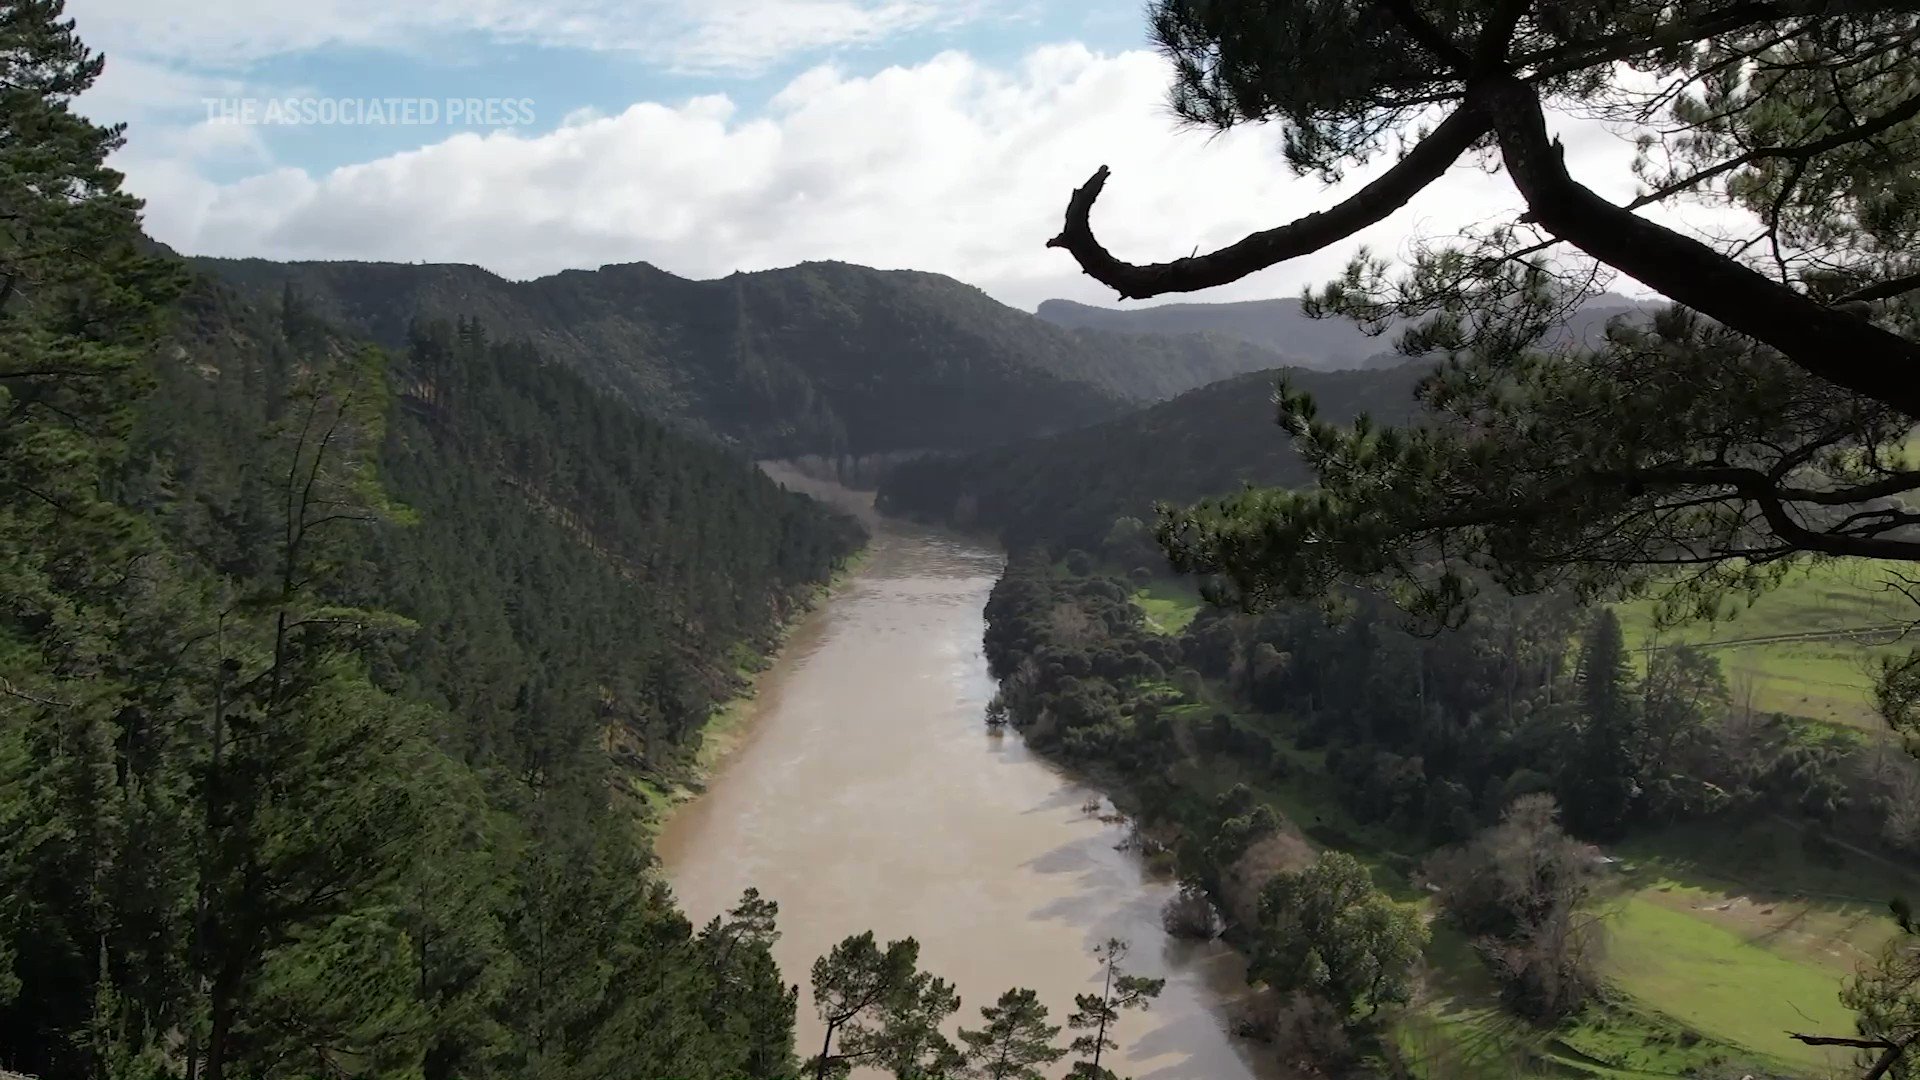 @AP: Cultures around the world have long deemed rivers sacred. Some of those rivers face dire threats, while others have only recently begun to heal. This story is part of an @AP series documenting sacred rivers around the world.